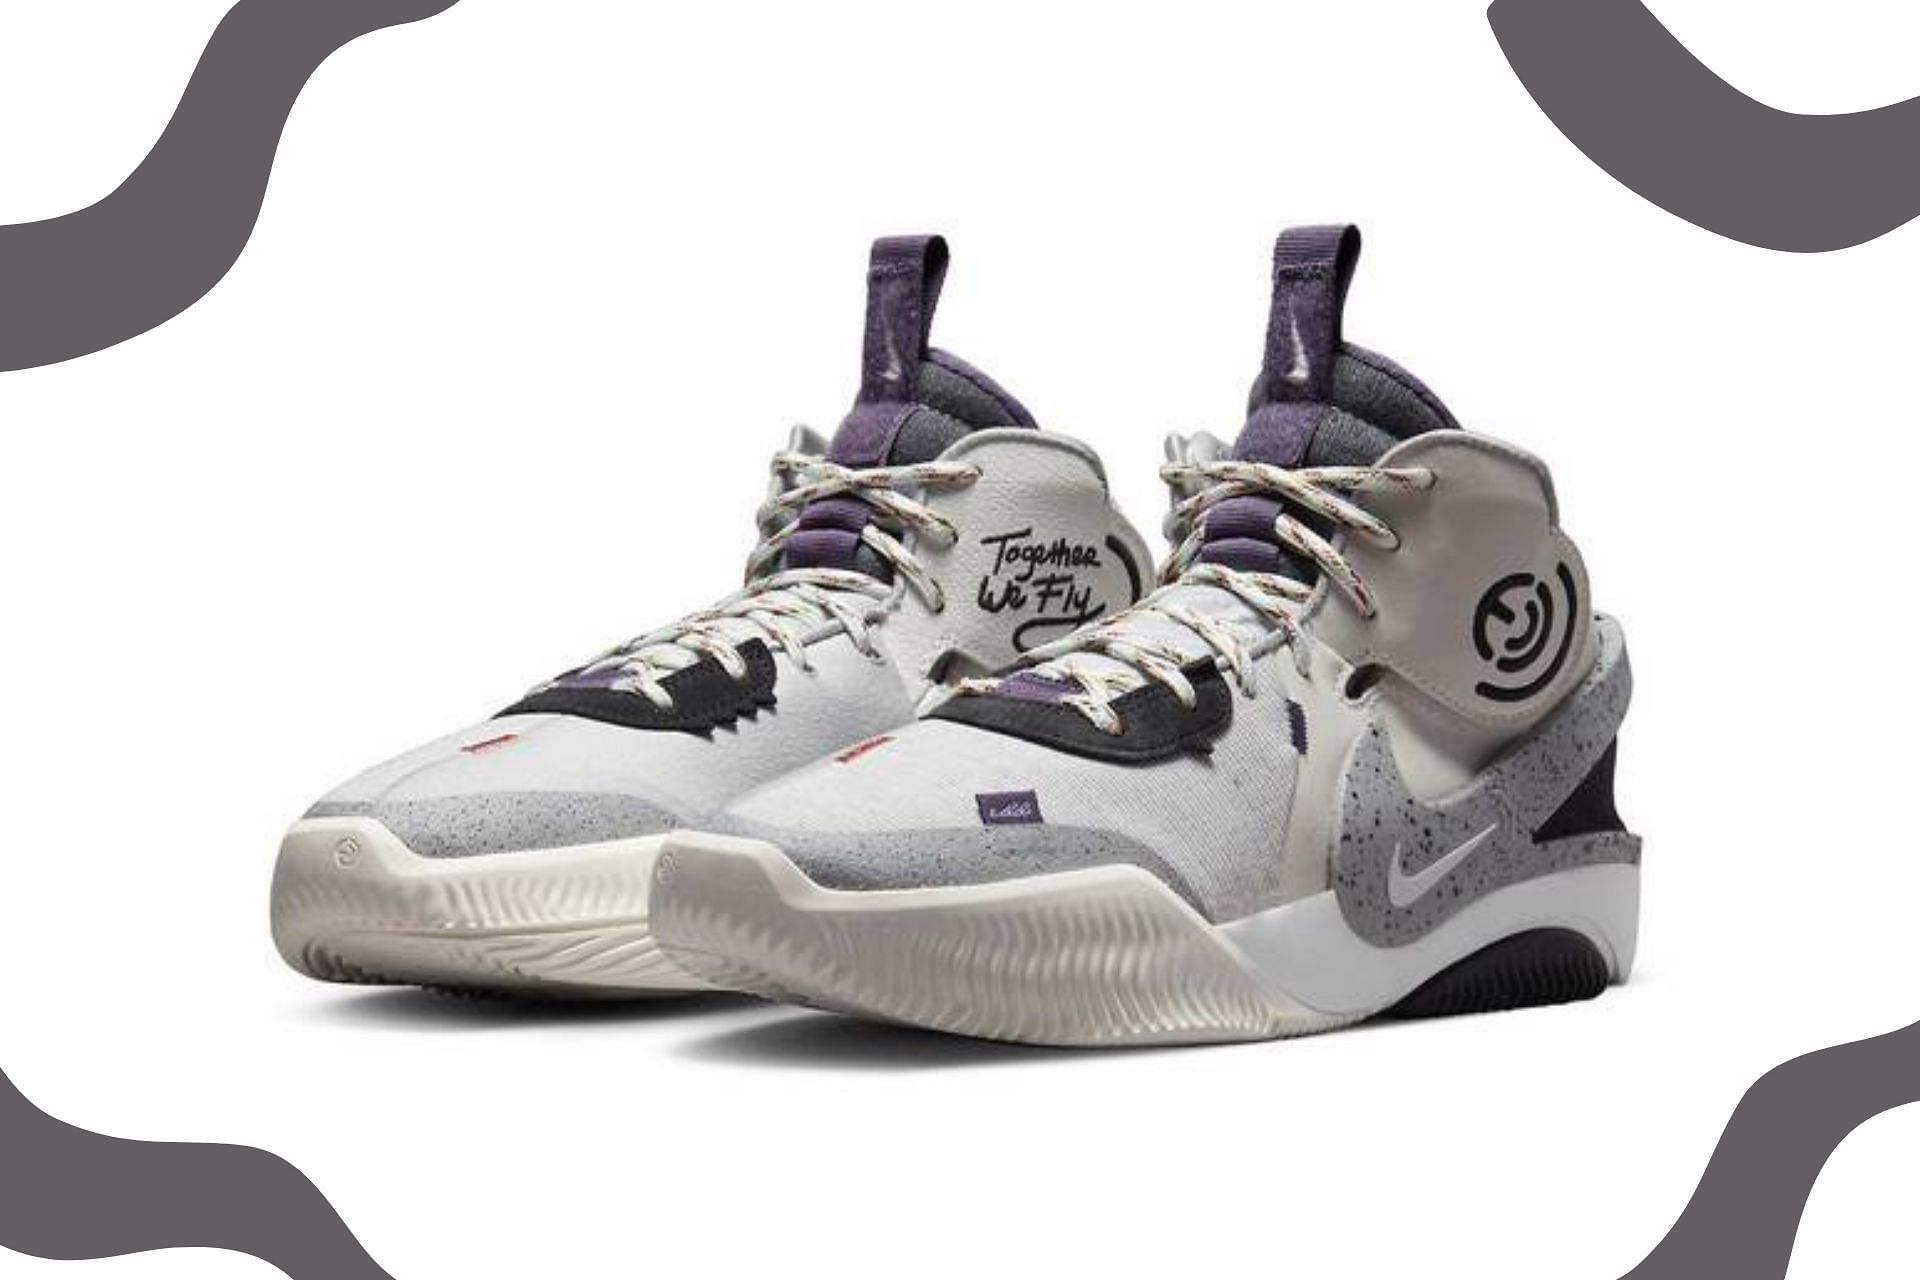 Elena Delle Donne reveals first signature shoe with Nike - Just